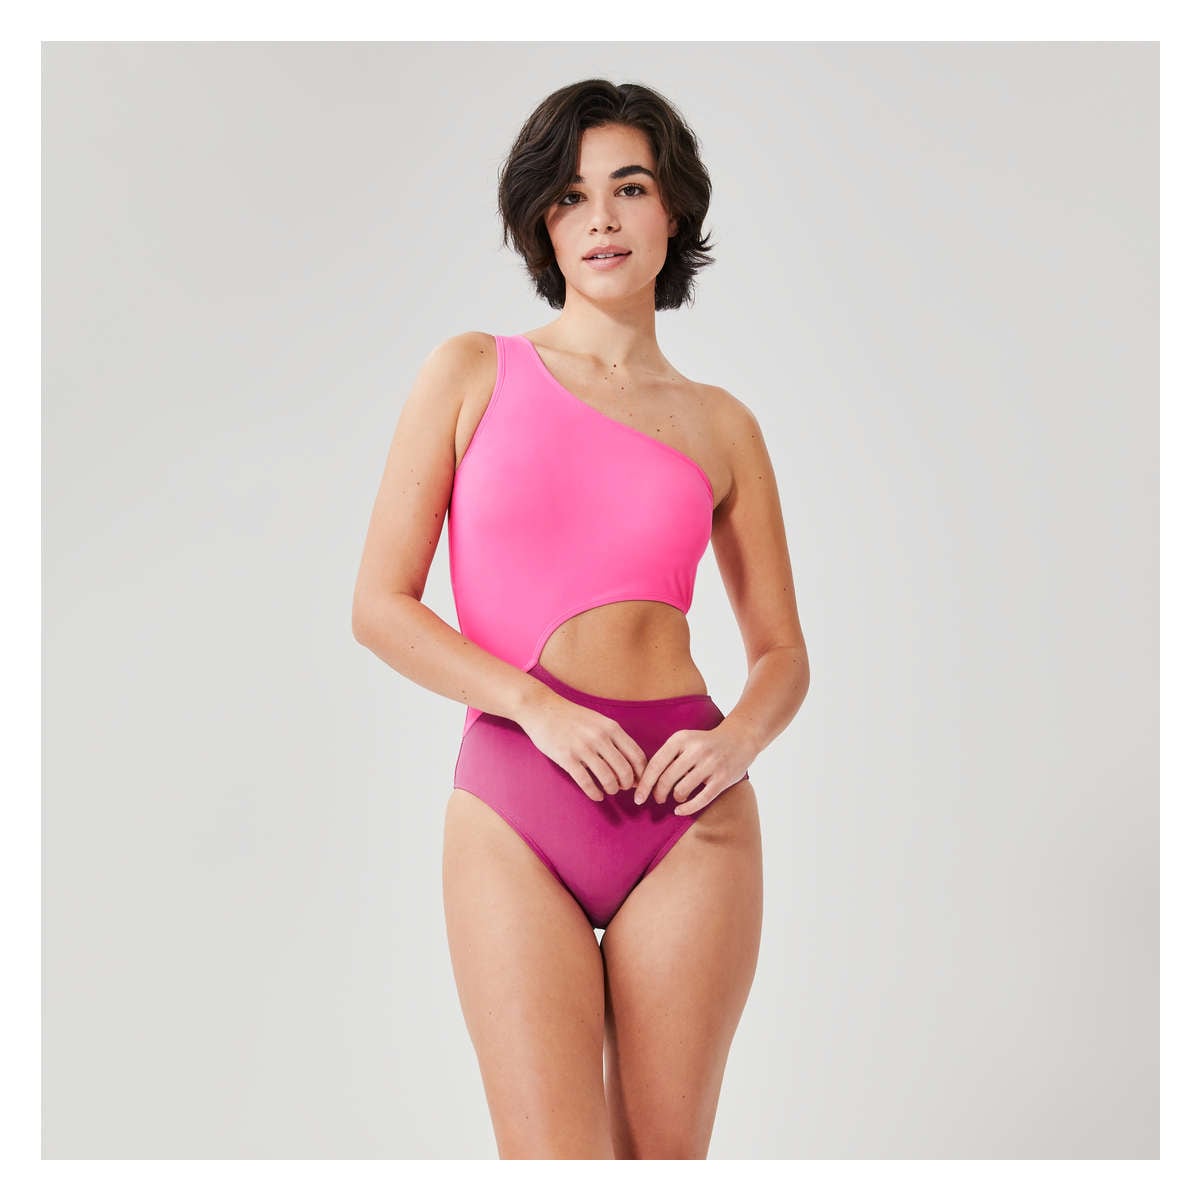 One-Shoulder Swimsuit in Bright Pink from Joe Fresh